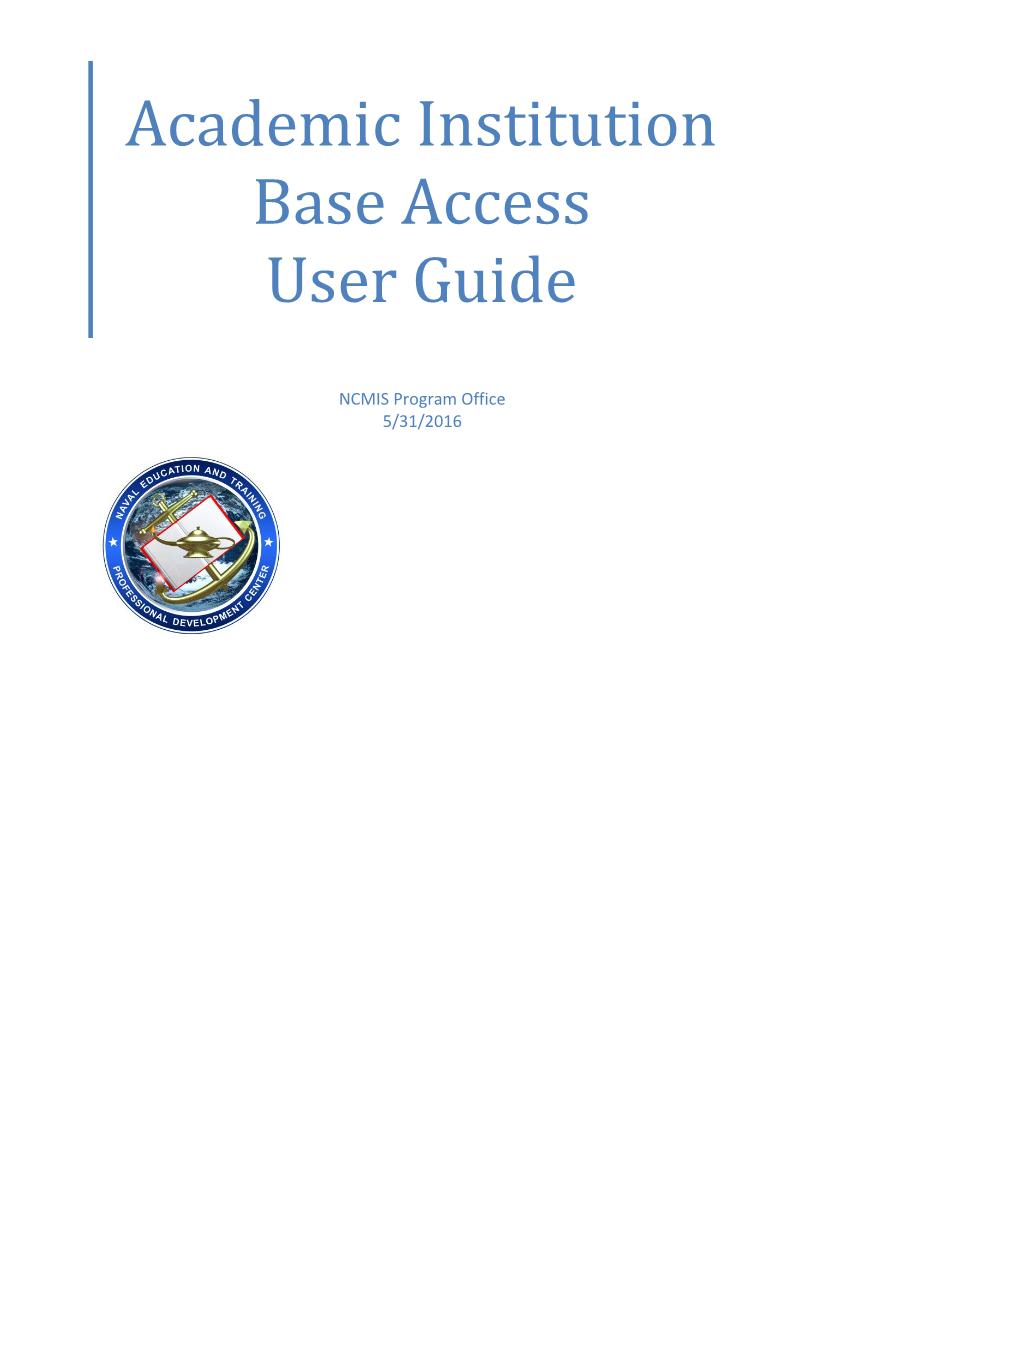 Academic Institution Base Access User Guide